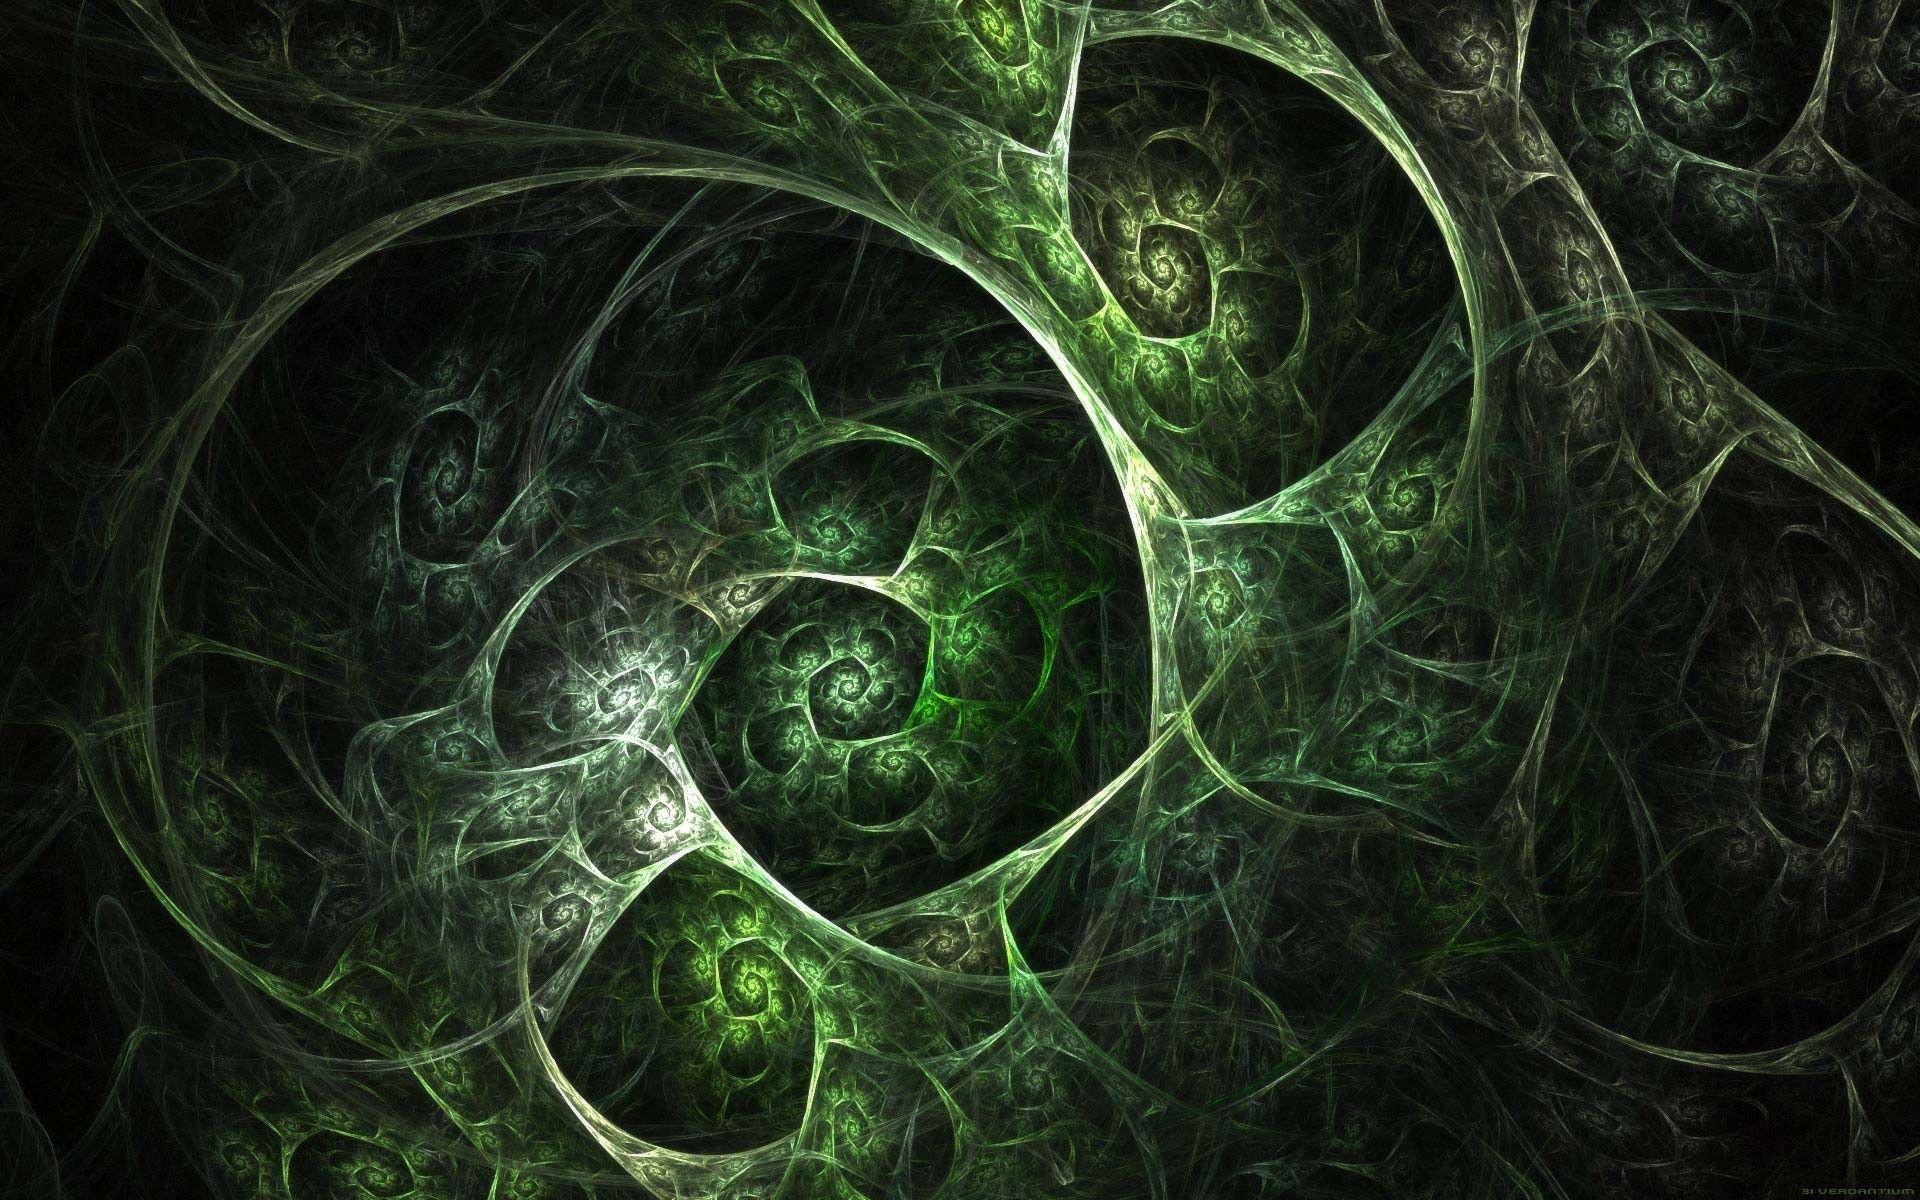 Green and Black Abstract Wallpaper